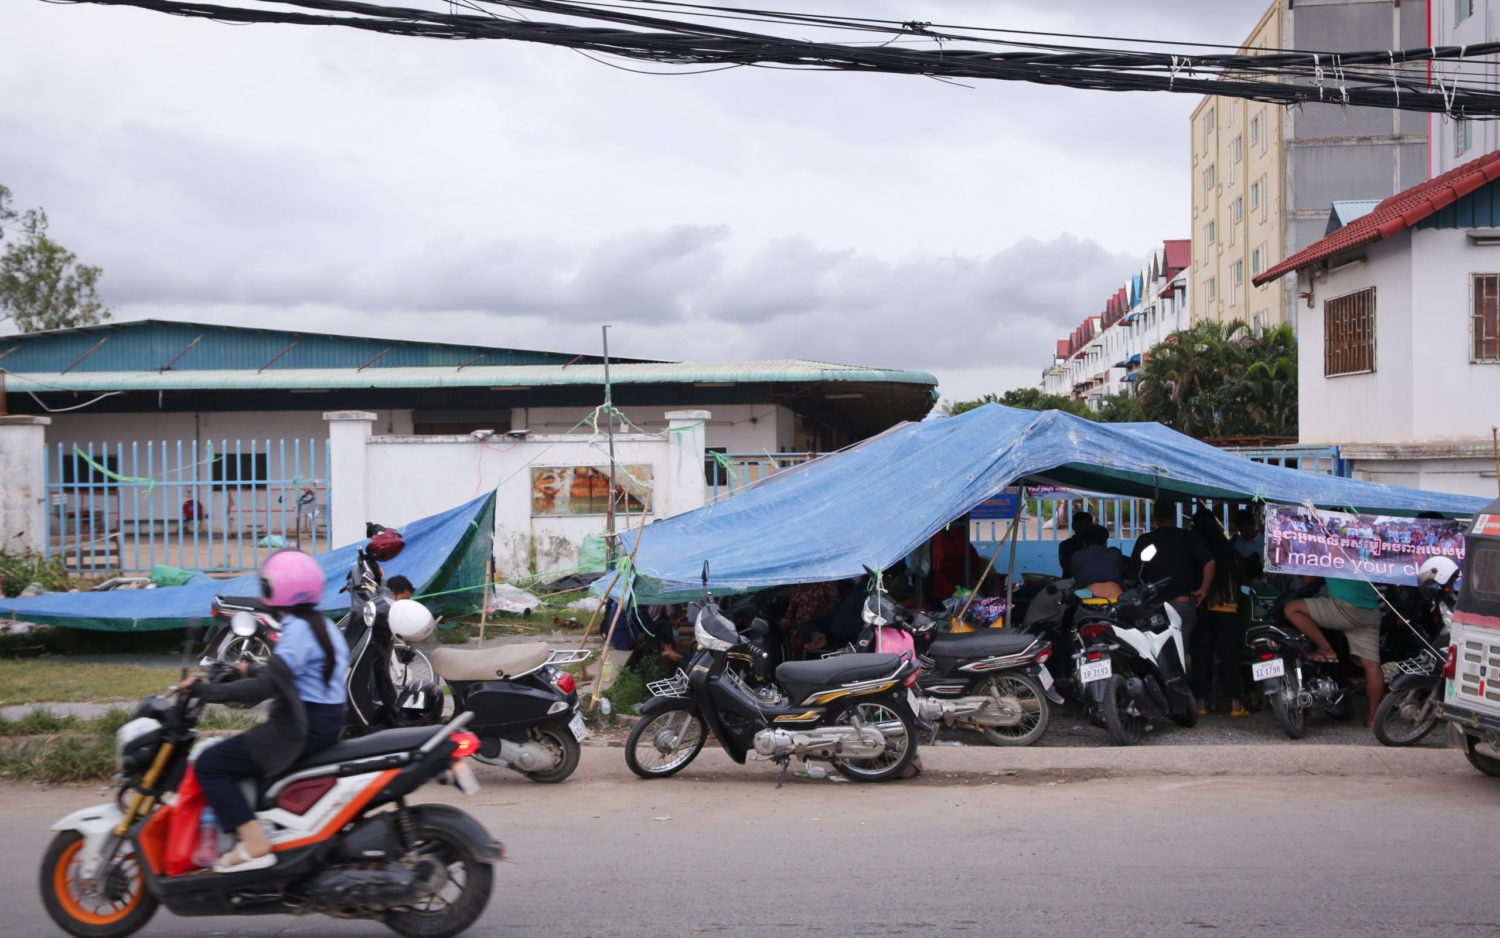 Workers camp outside Phnom Penh’s Canteran Apparel factory on Veng Sreng Blvd on July 21, 2022. (Hean Rangsey/VOD)